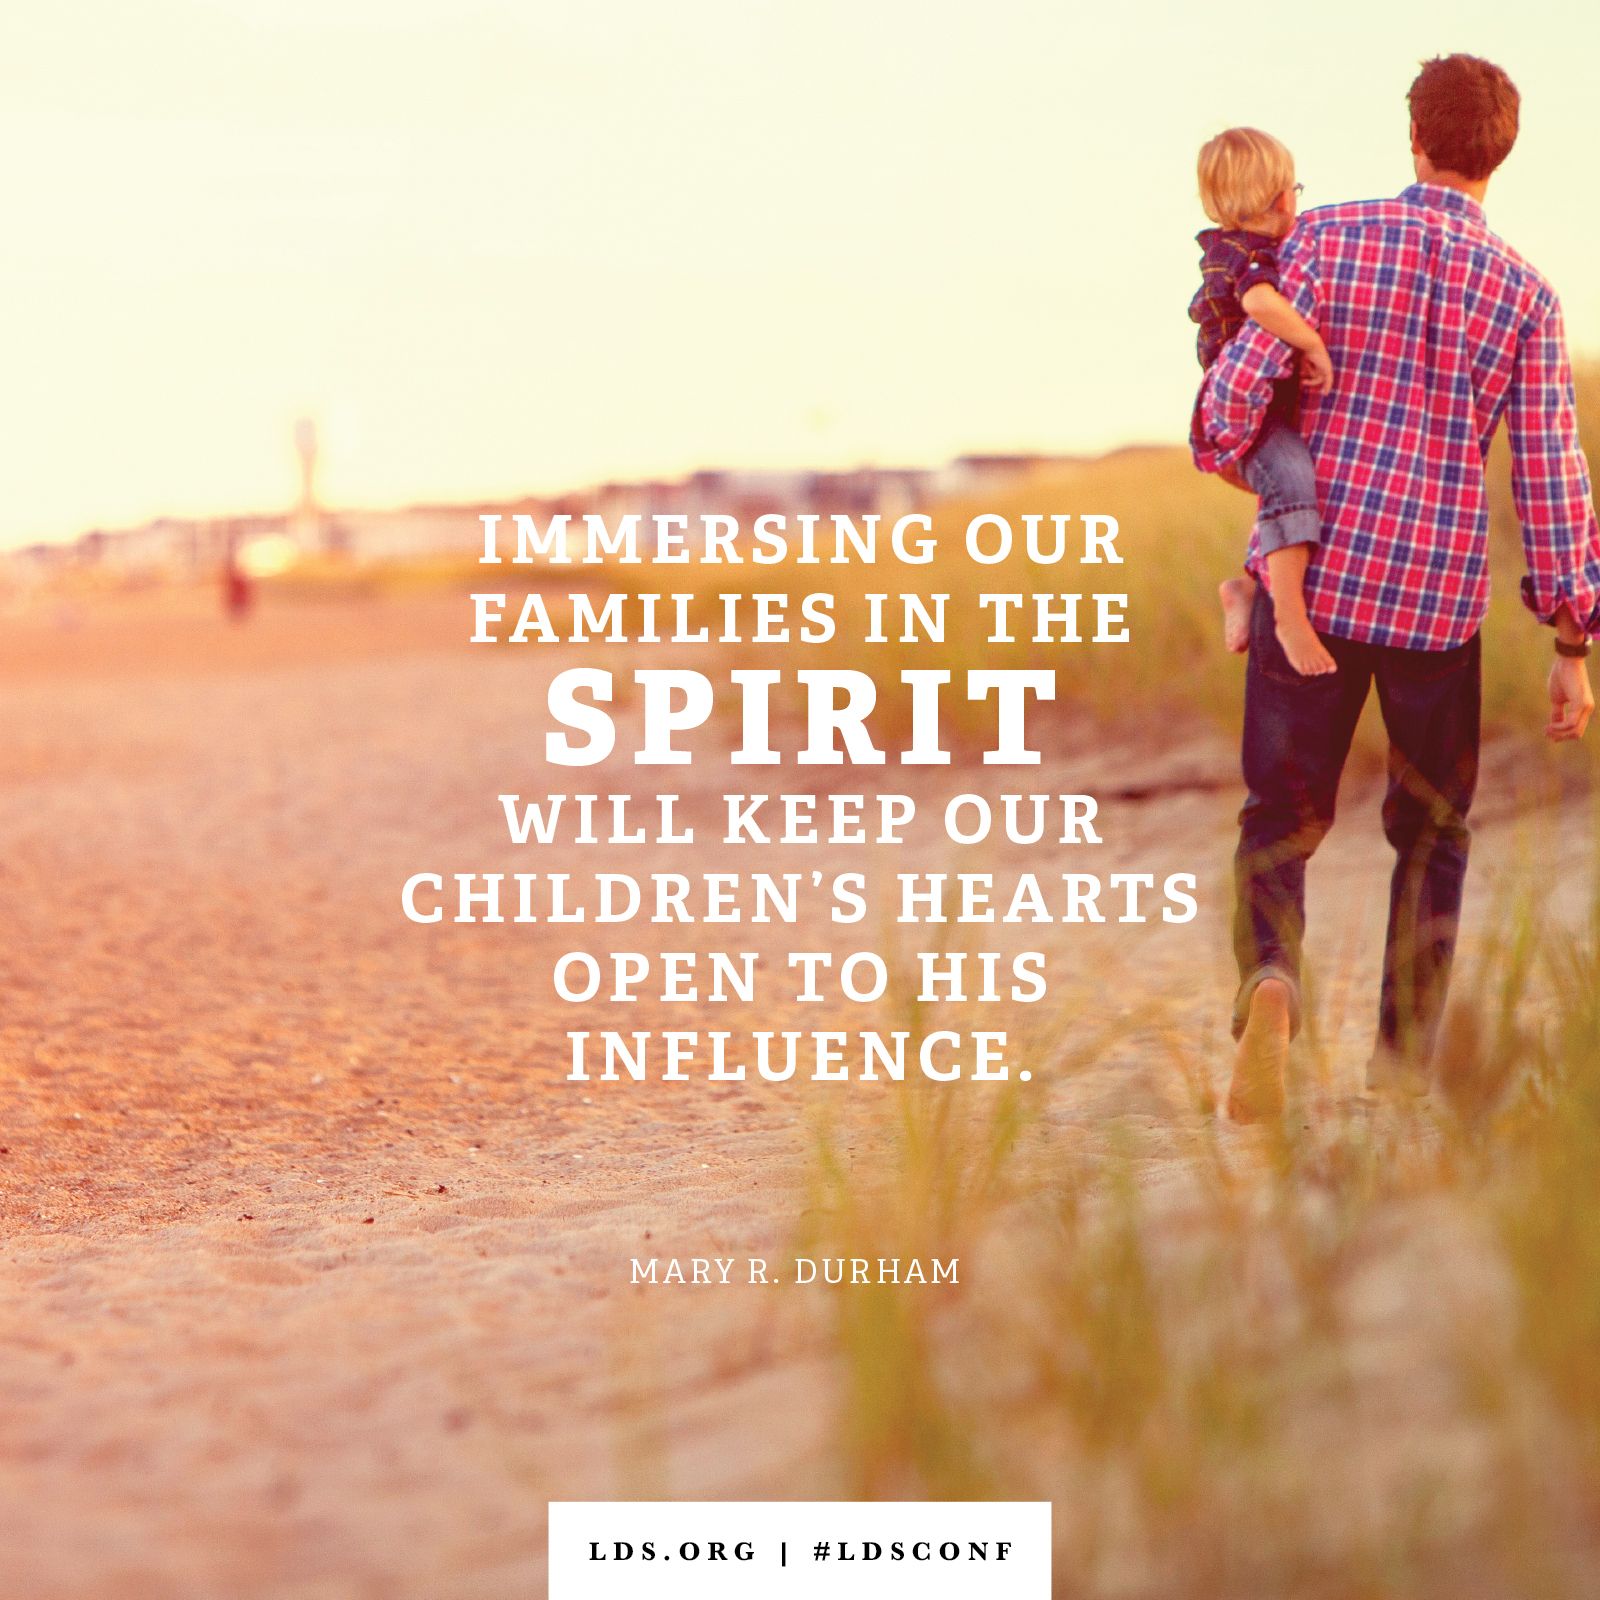 “Immersing our families in the Spirit will keep our children’s hearts open to His influence.” —Sister Mary R. Durham, “A Child’s Guiding Gift”